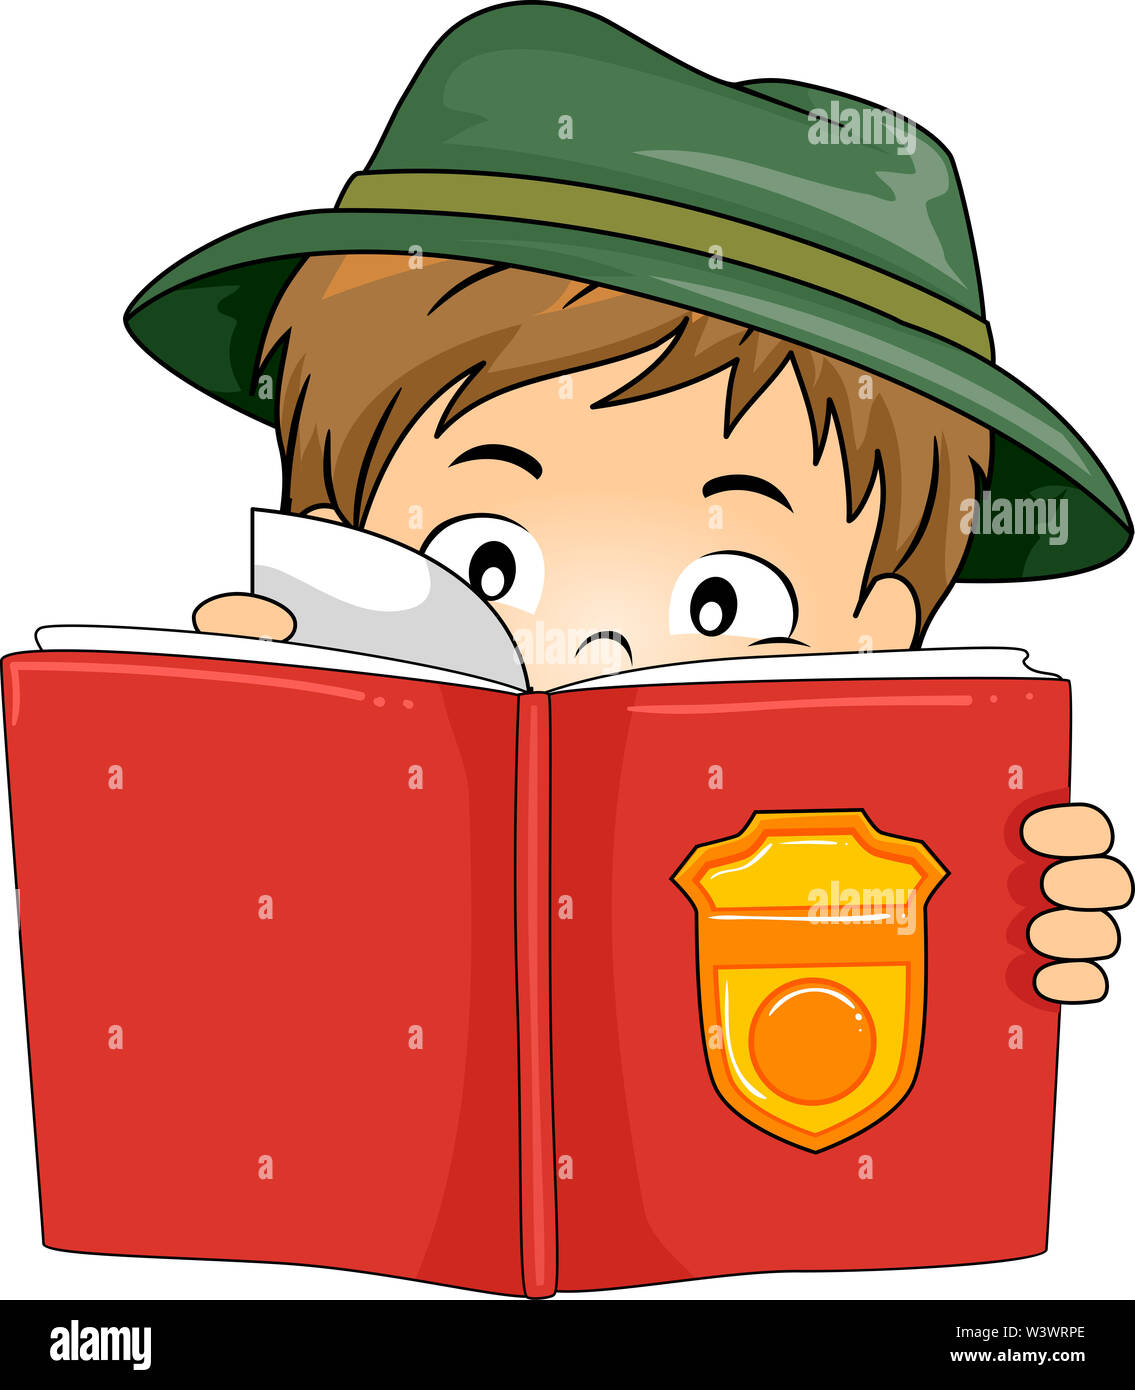 Illustration of a Kid Boy Wearing Park Ranger Hat and Holding an Activity Book with Seal Stock Photo